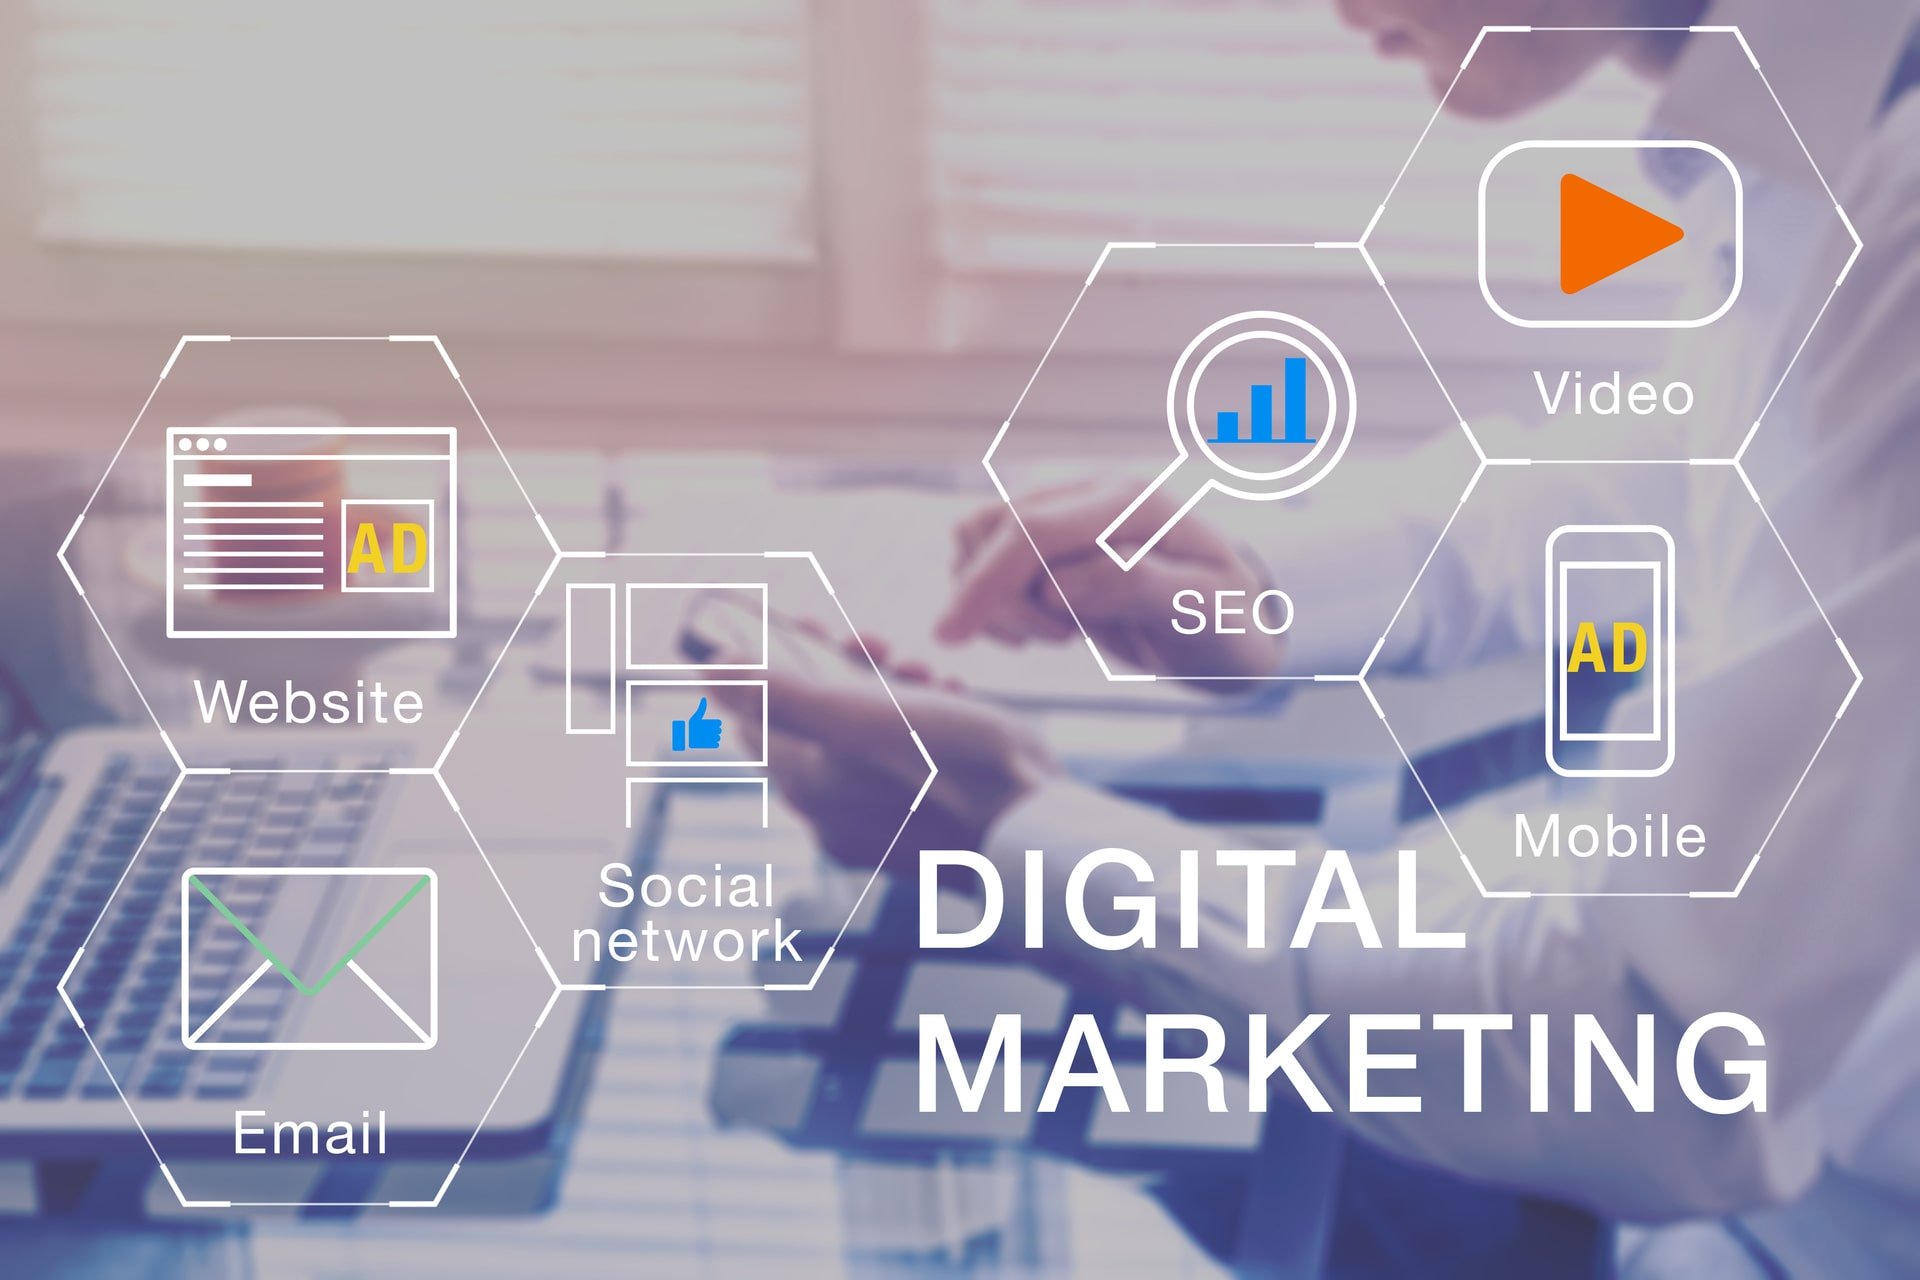 Digital marketing improves your business's online presence and increases traffic to your website